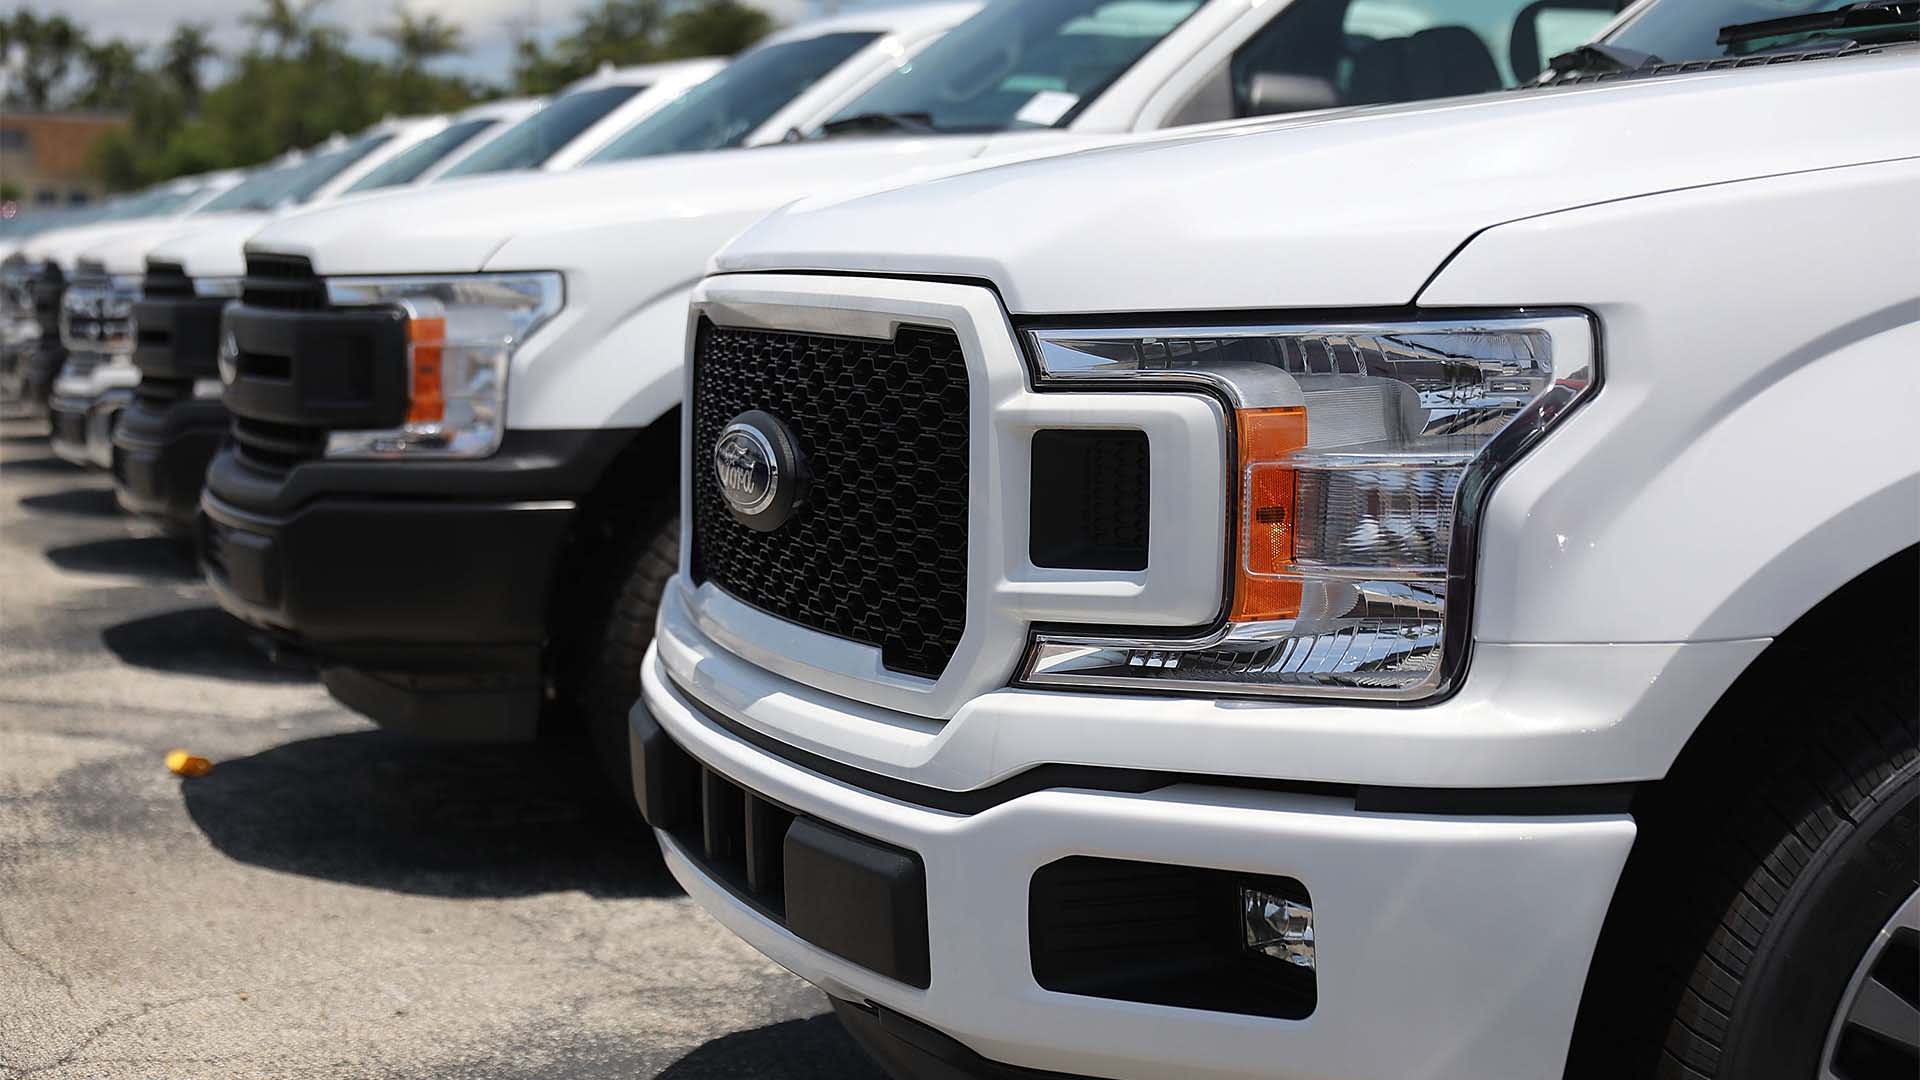 Ford F-150 Electric Pickup Buyers Got Something They Weren't Expecting. It's a Very Clever Move